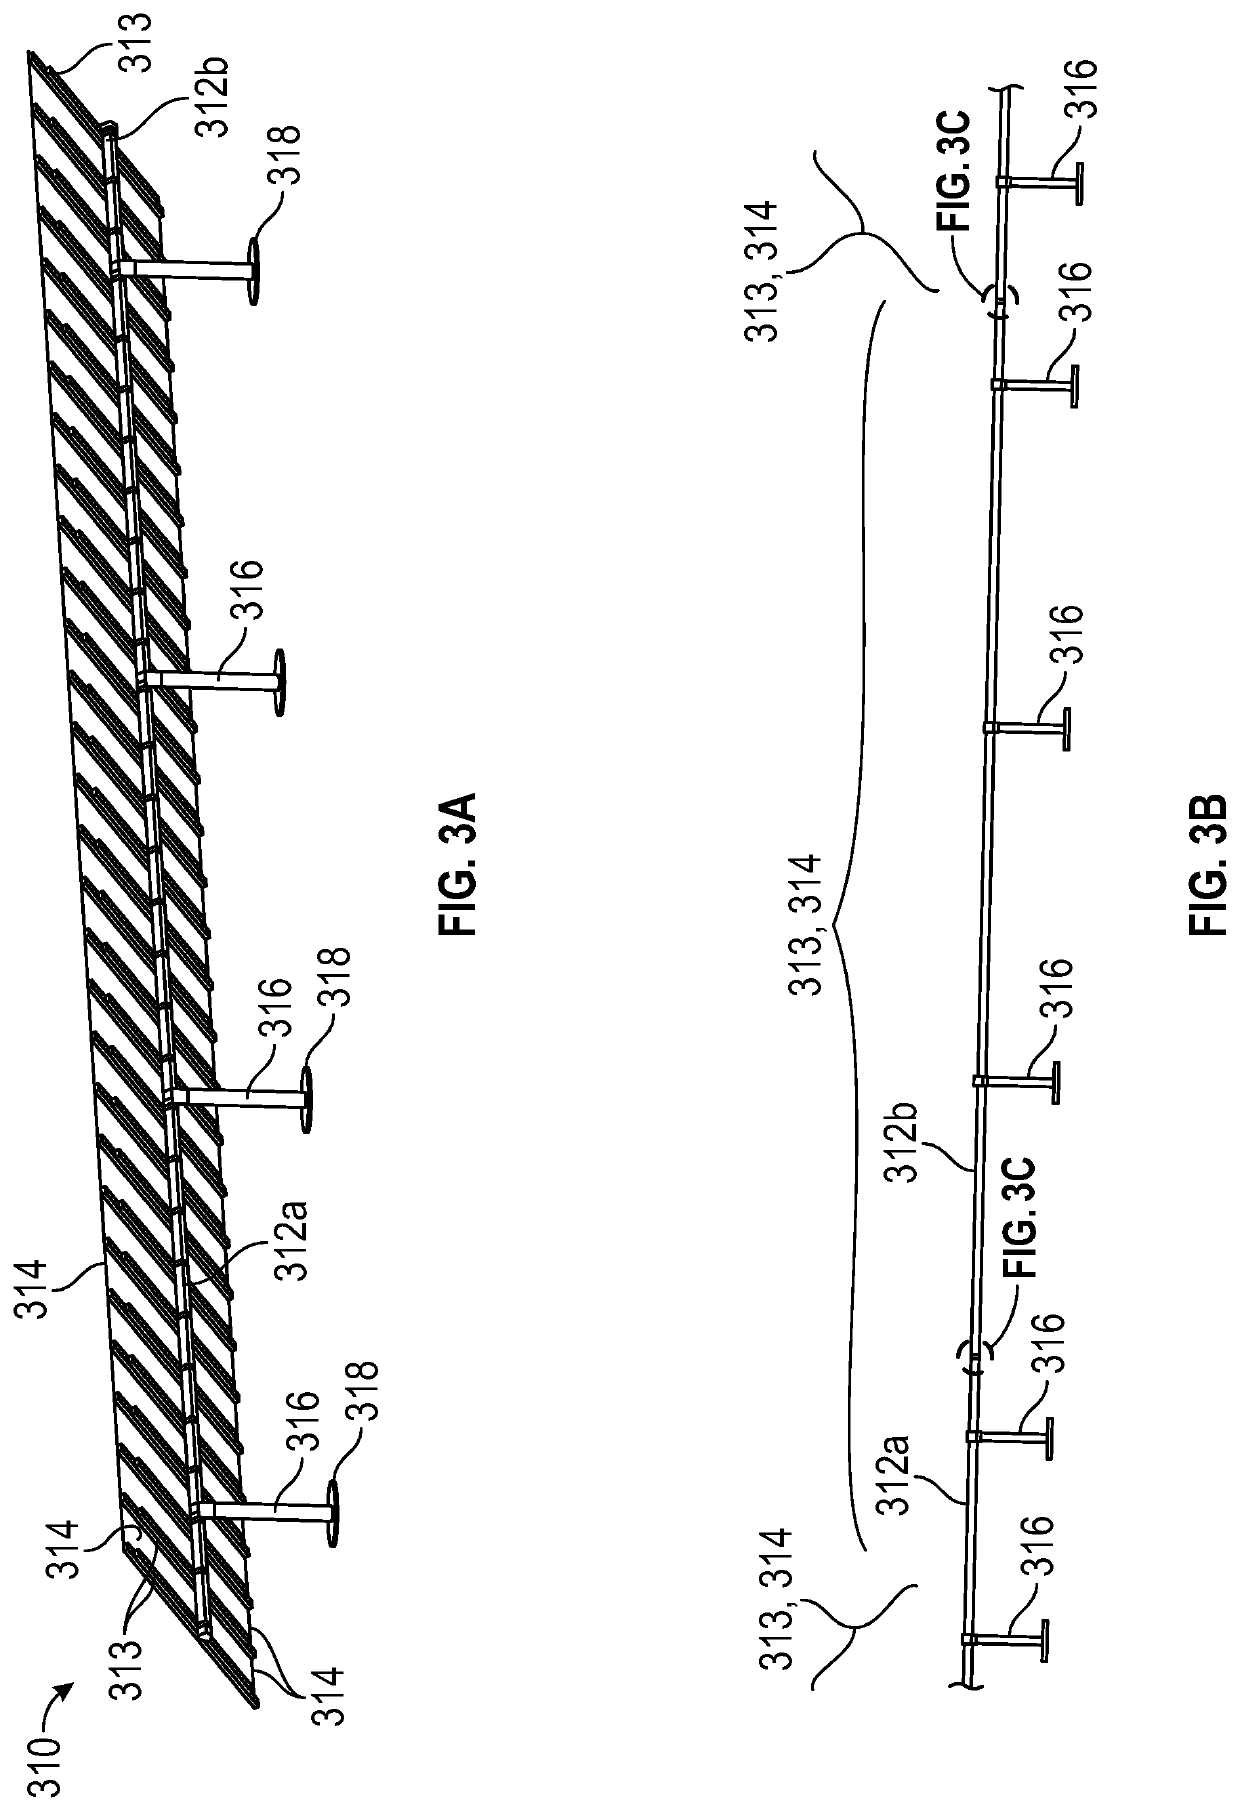 Expandable splice for a solar power system